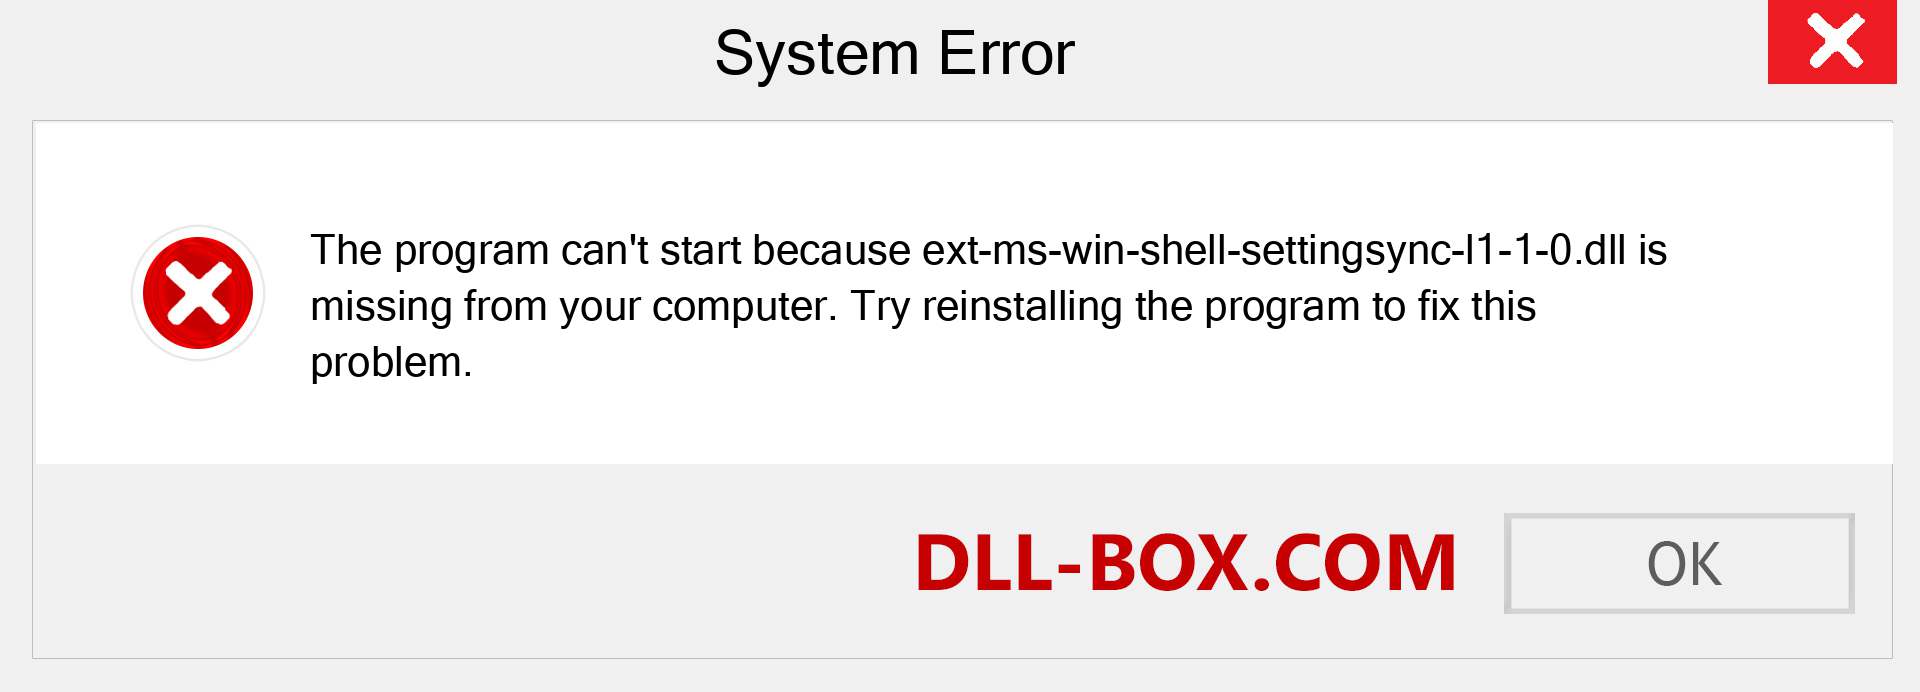  ext-ms-win-shell-settingsync-l1-1-0.dll file is missing?. Download for Windows 7, 8, 10 - Fix  ext-ms-win-shell-settingsync-l1-1-0 dll Missing Error on Windows, photos, images